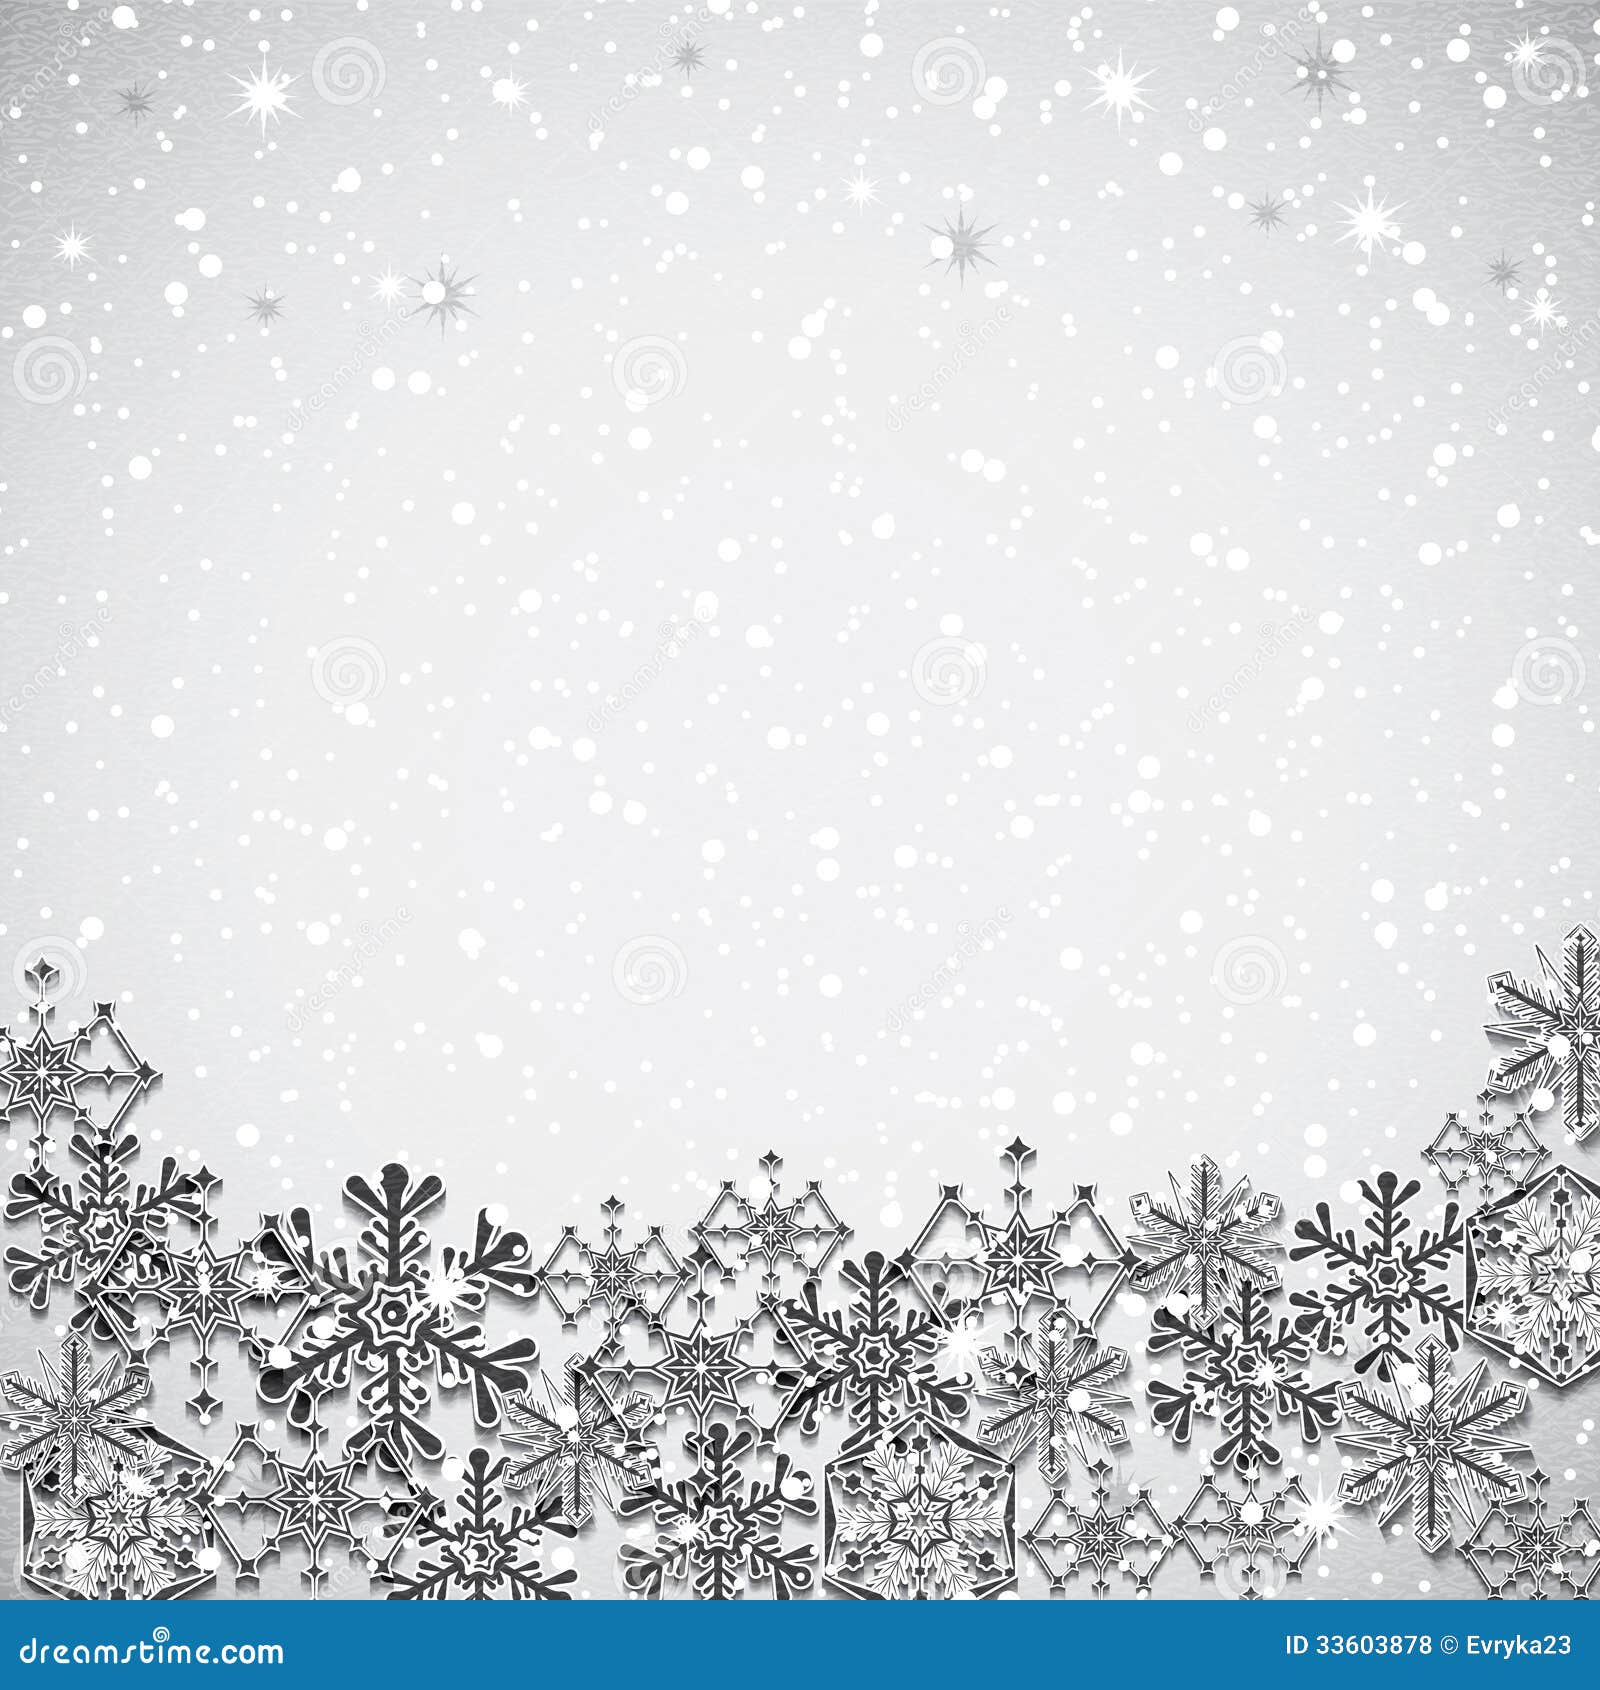 free clipart winter background - photo #39